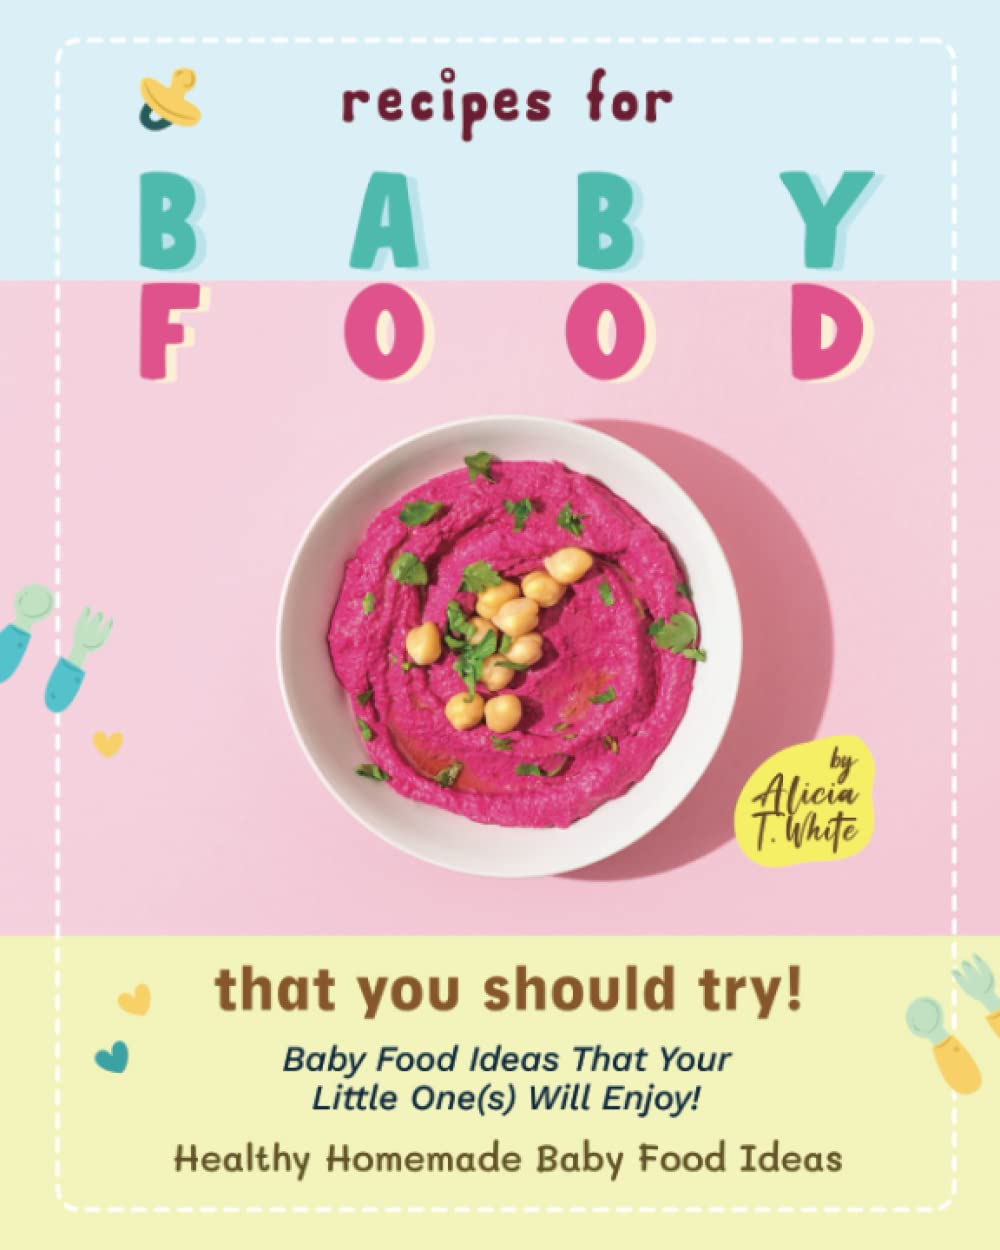 Recipes for Baby Food That You Should Try!: Baby Food Ideas That Your Little One(s) Will Enjoy!